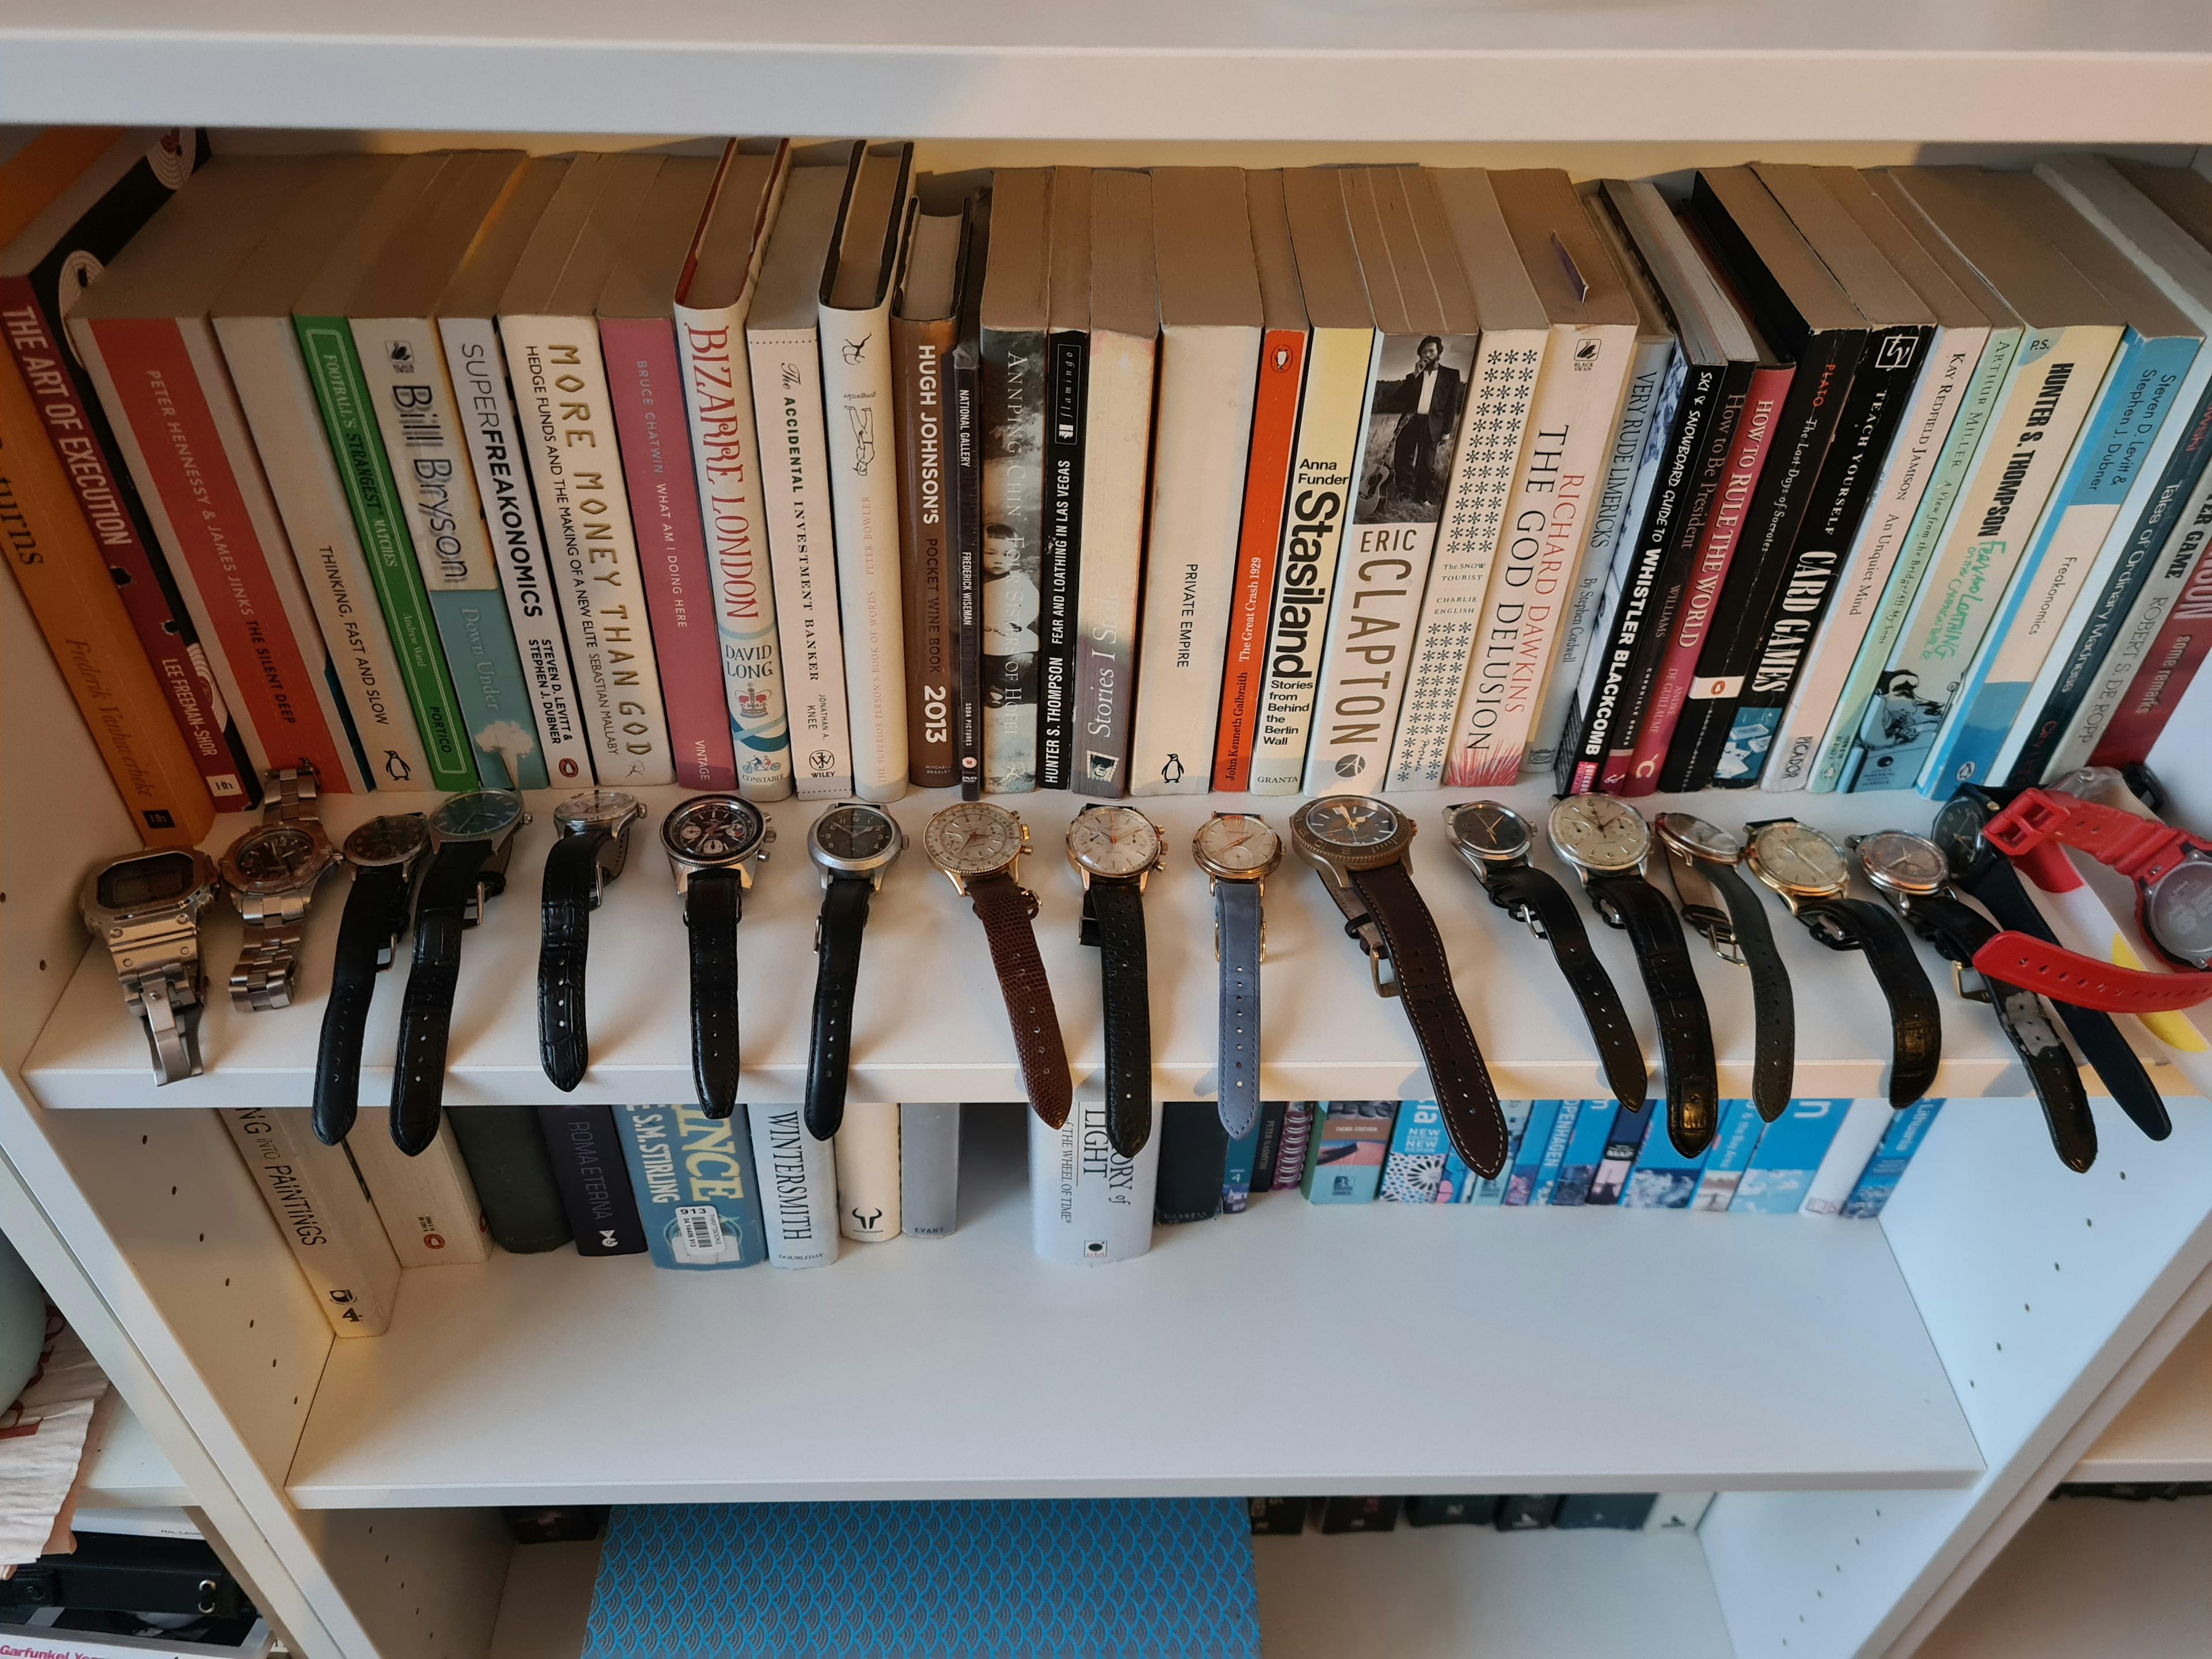 A watch collection lined up on a bookshelf with books behind it